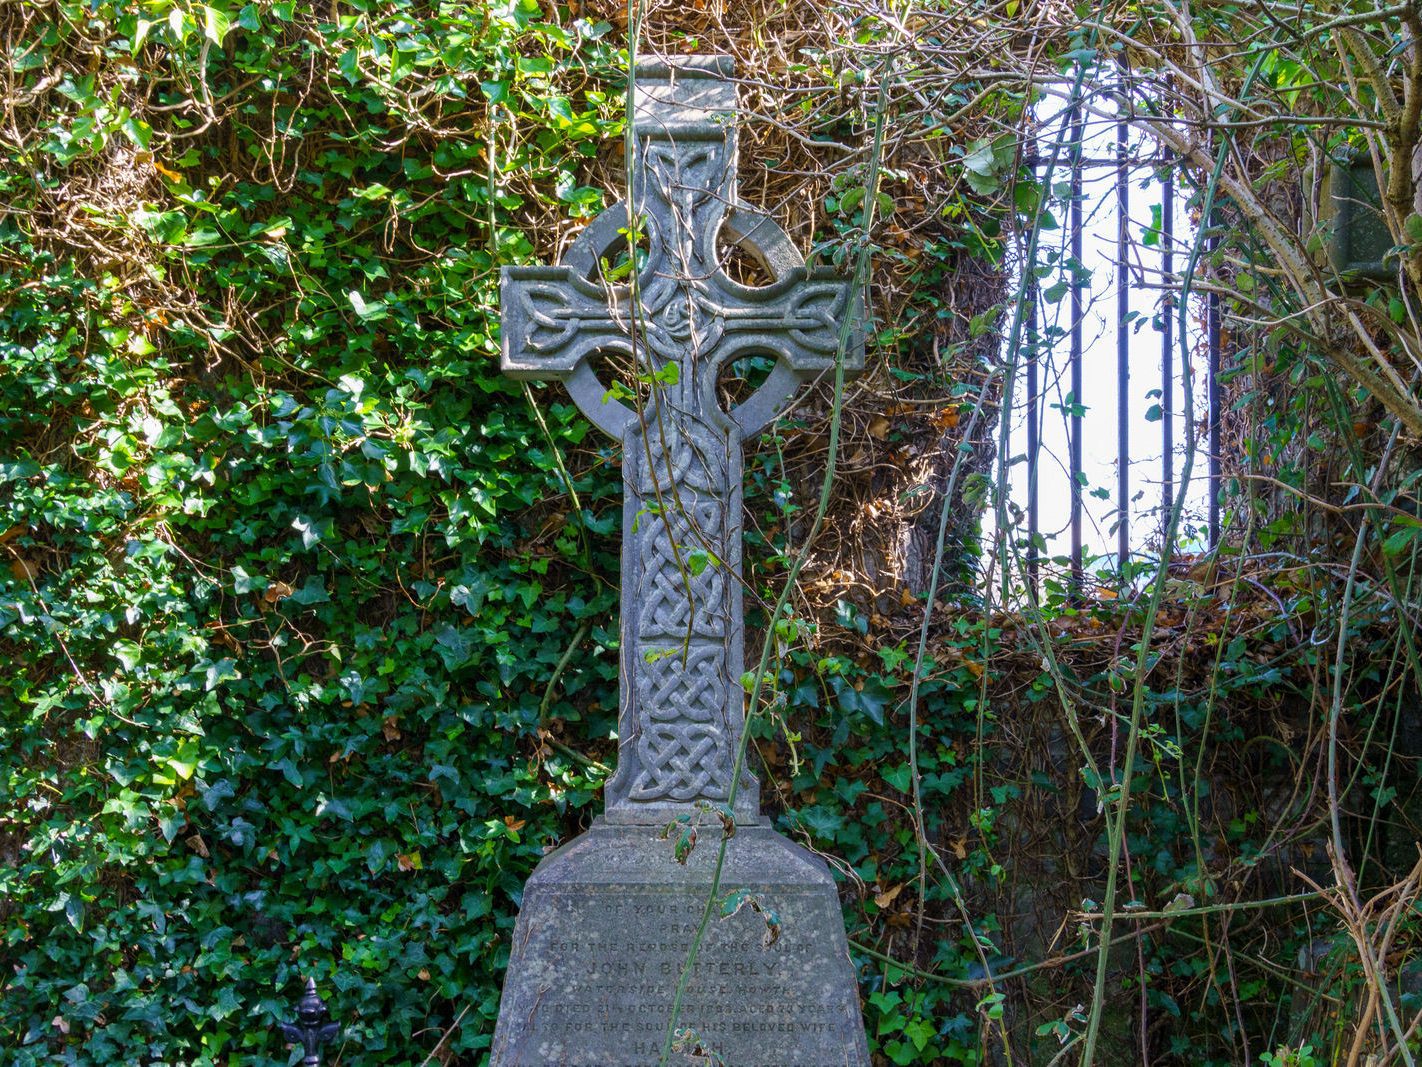 TODAY I MANAGED TO VISIT KILBARRACK CEMETERY [AFTER A NUMBER OF FAILED ATTEMPTS OVER A PERIOD OF TEN YEARS] 011